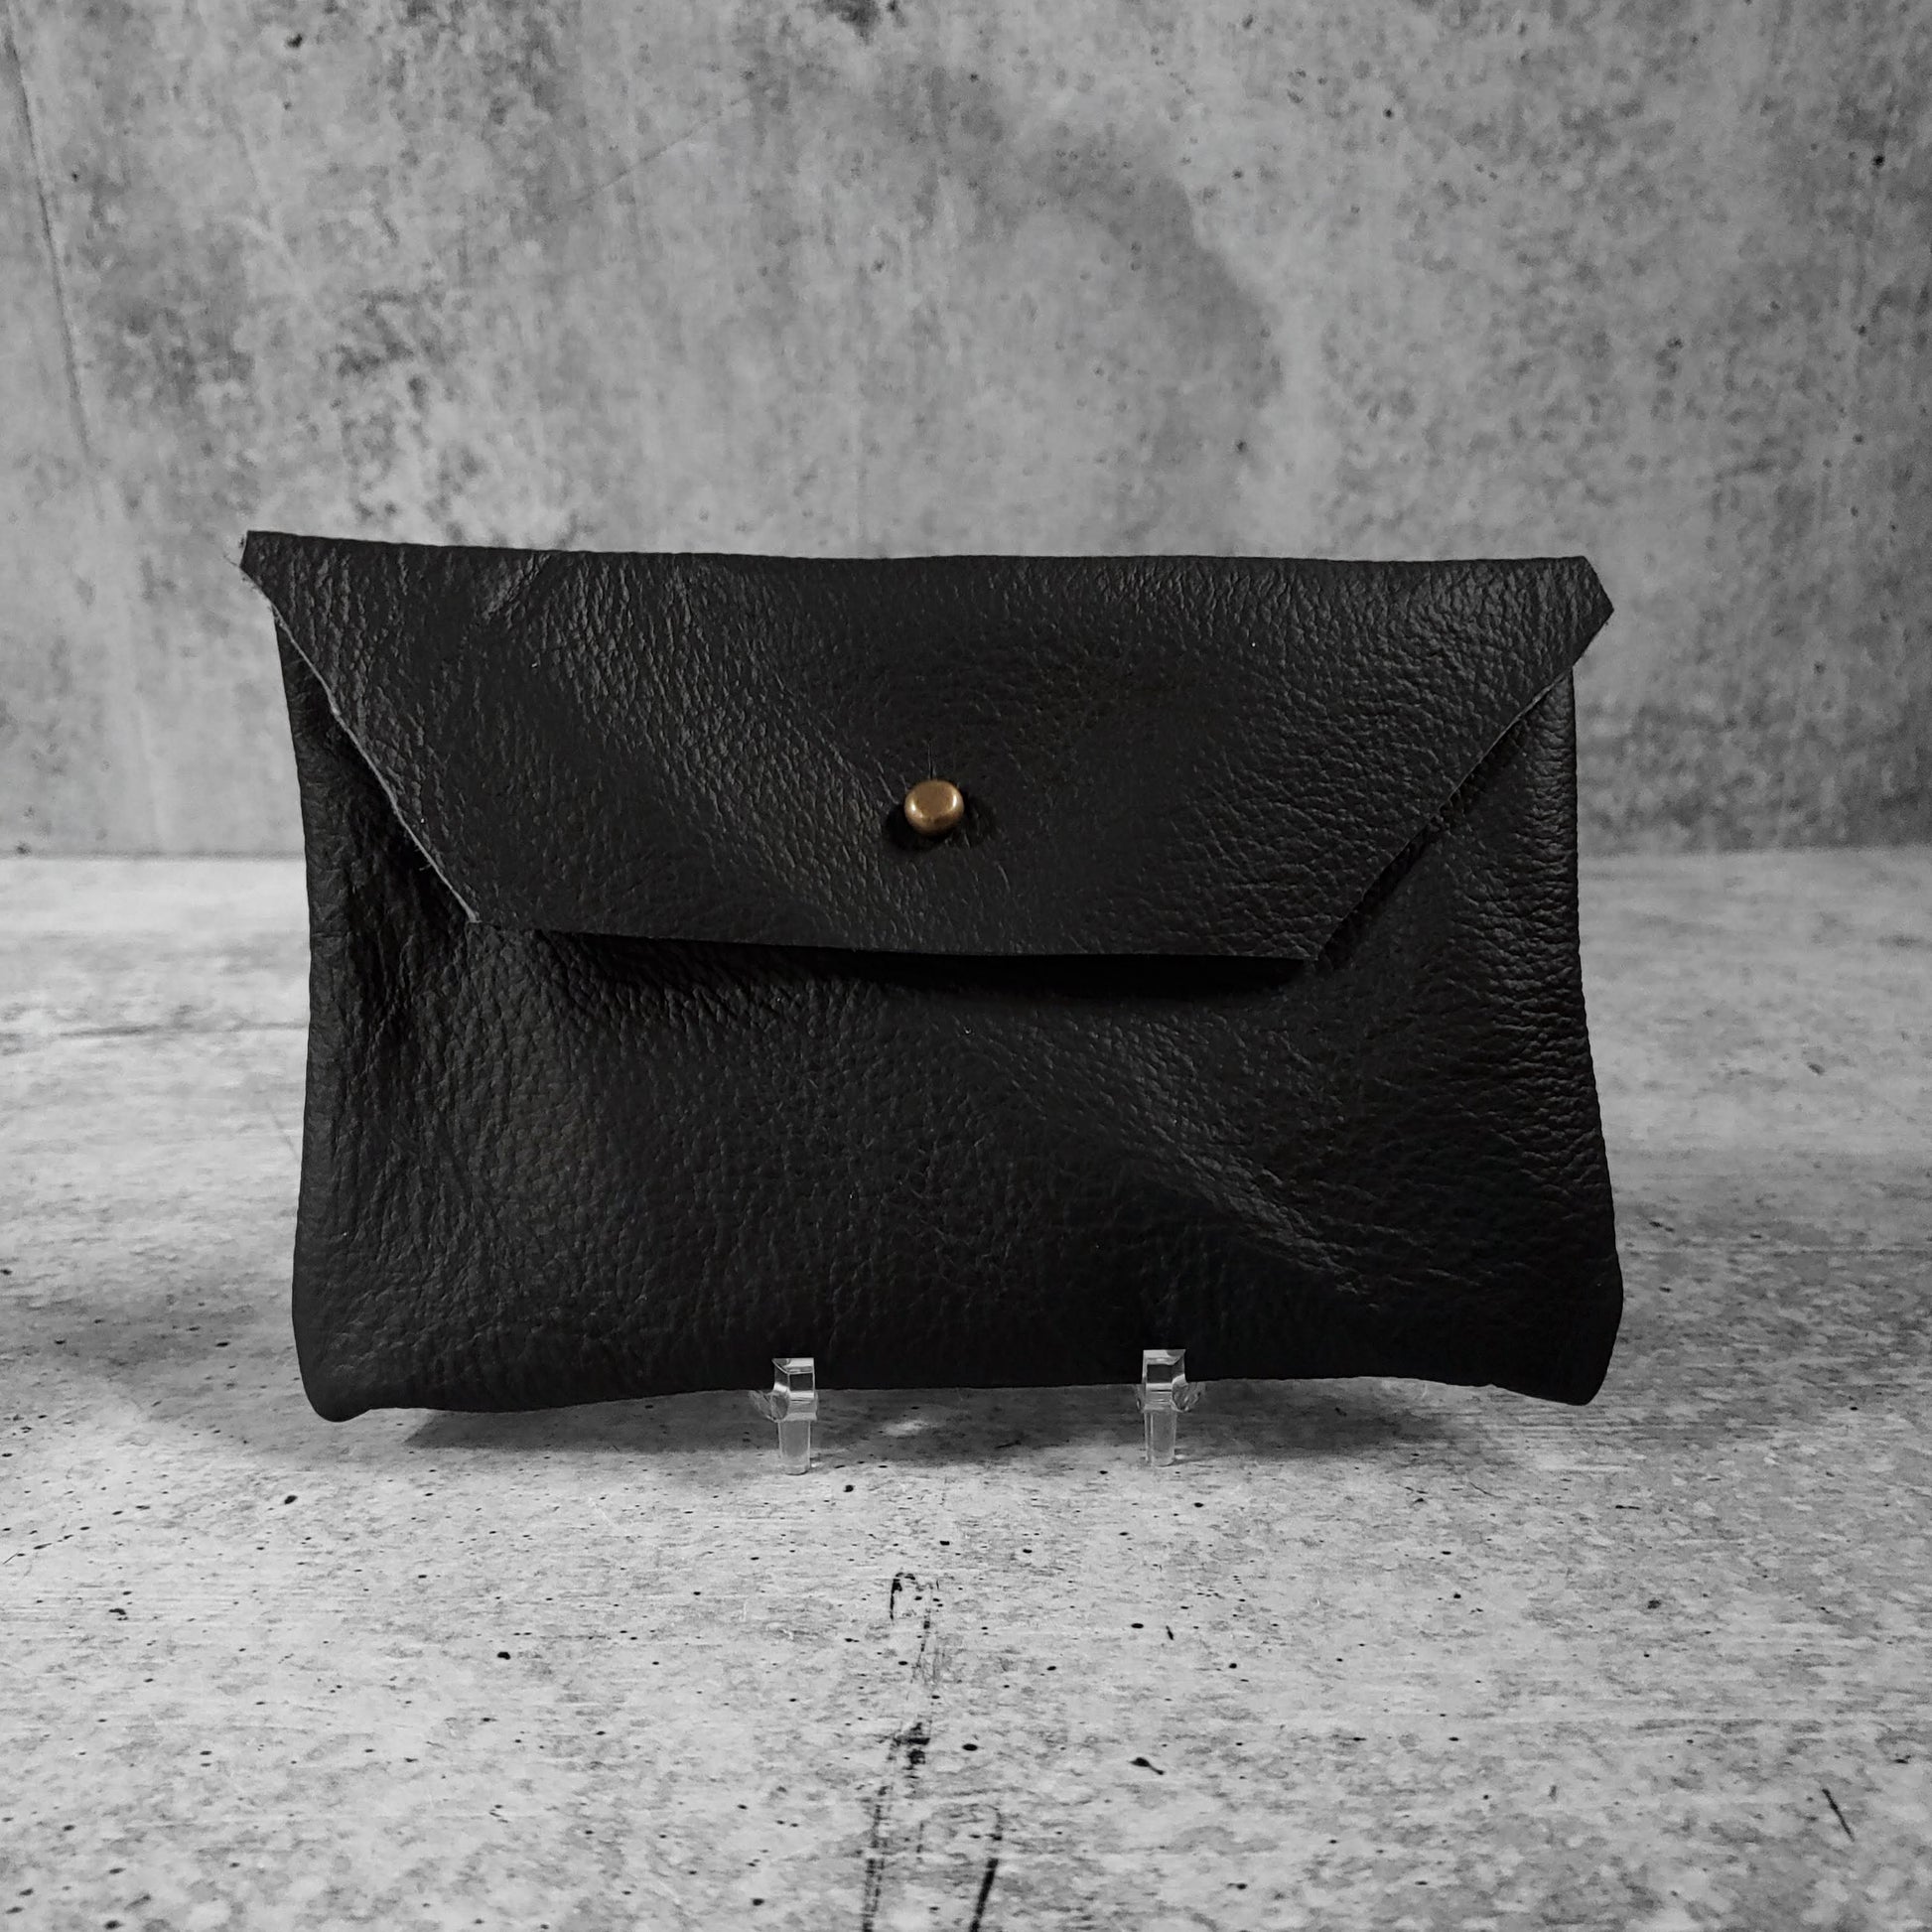 Front facing view of "soft leather clutch trapezoid" in onyx against a concrete background.